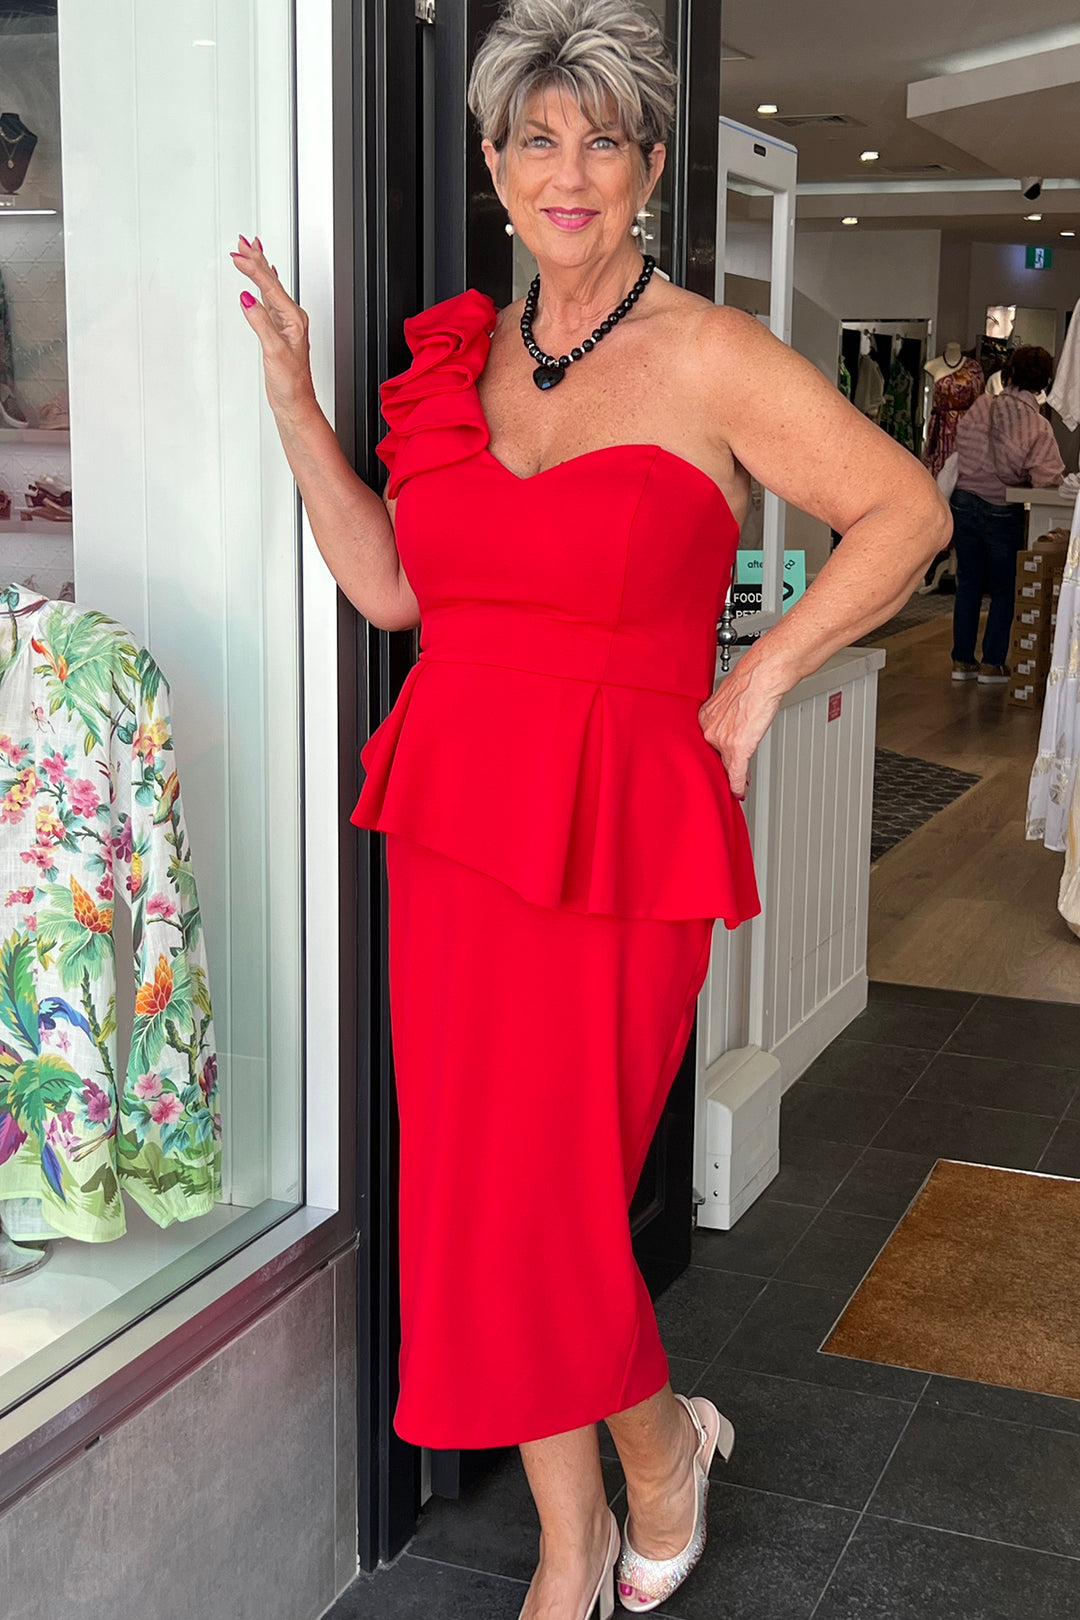 Woman wearing the Ruby Peplun Dress by Zaliea, sold and shipped from Pizazz Boutique online women's clothes shops Australia